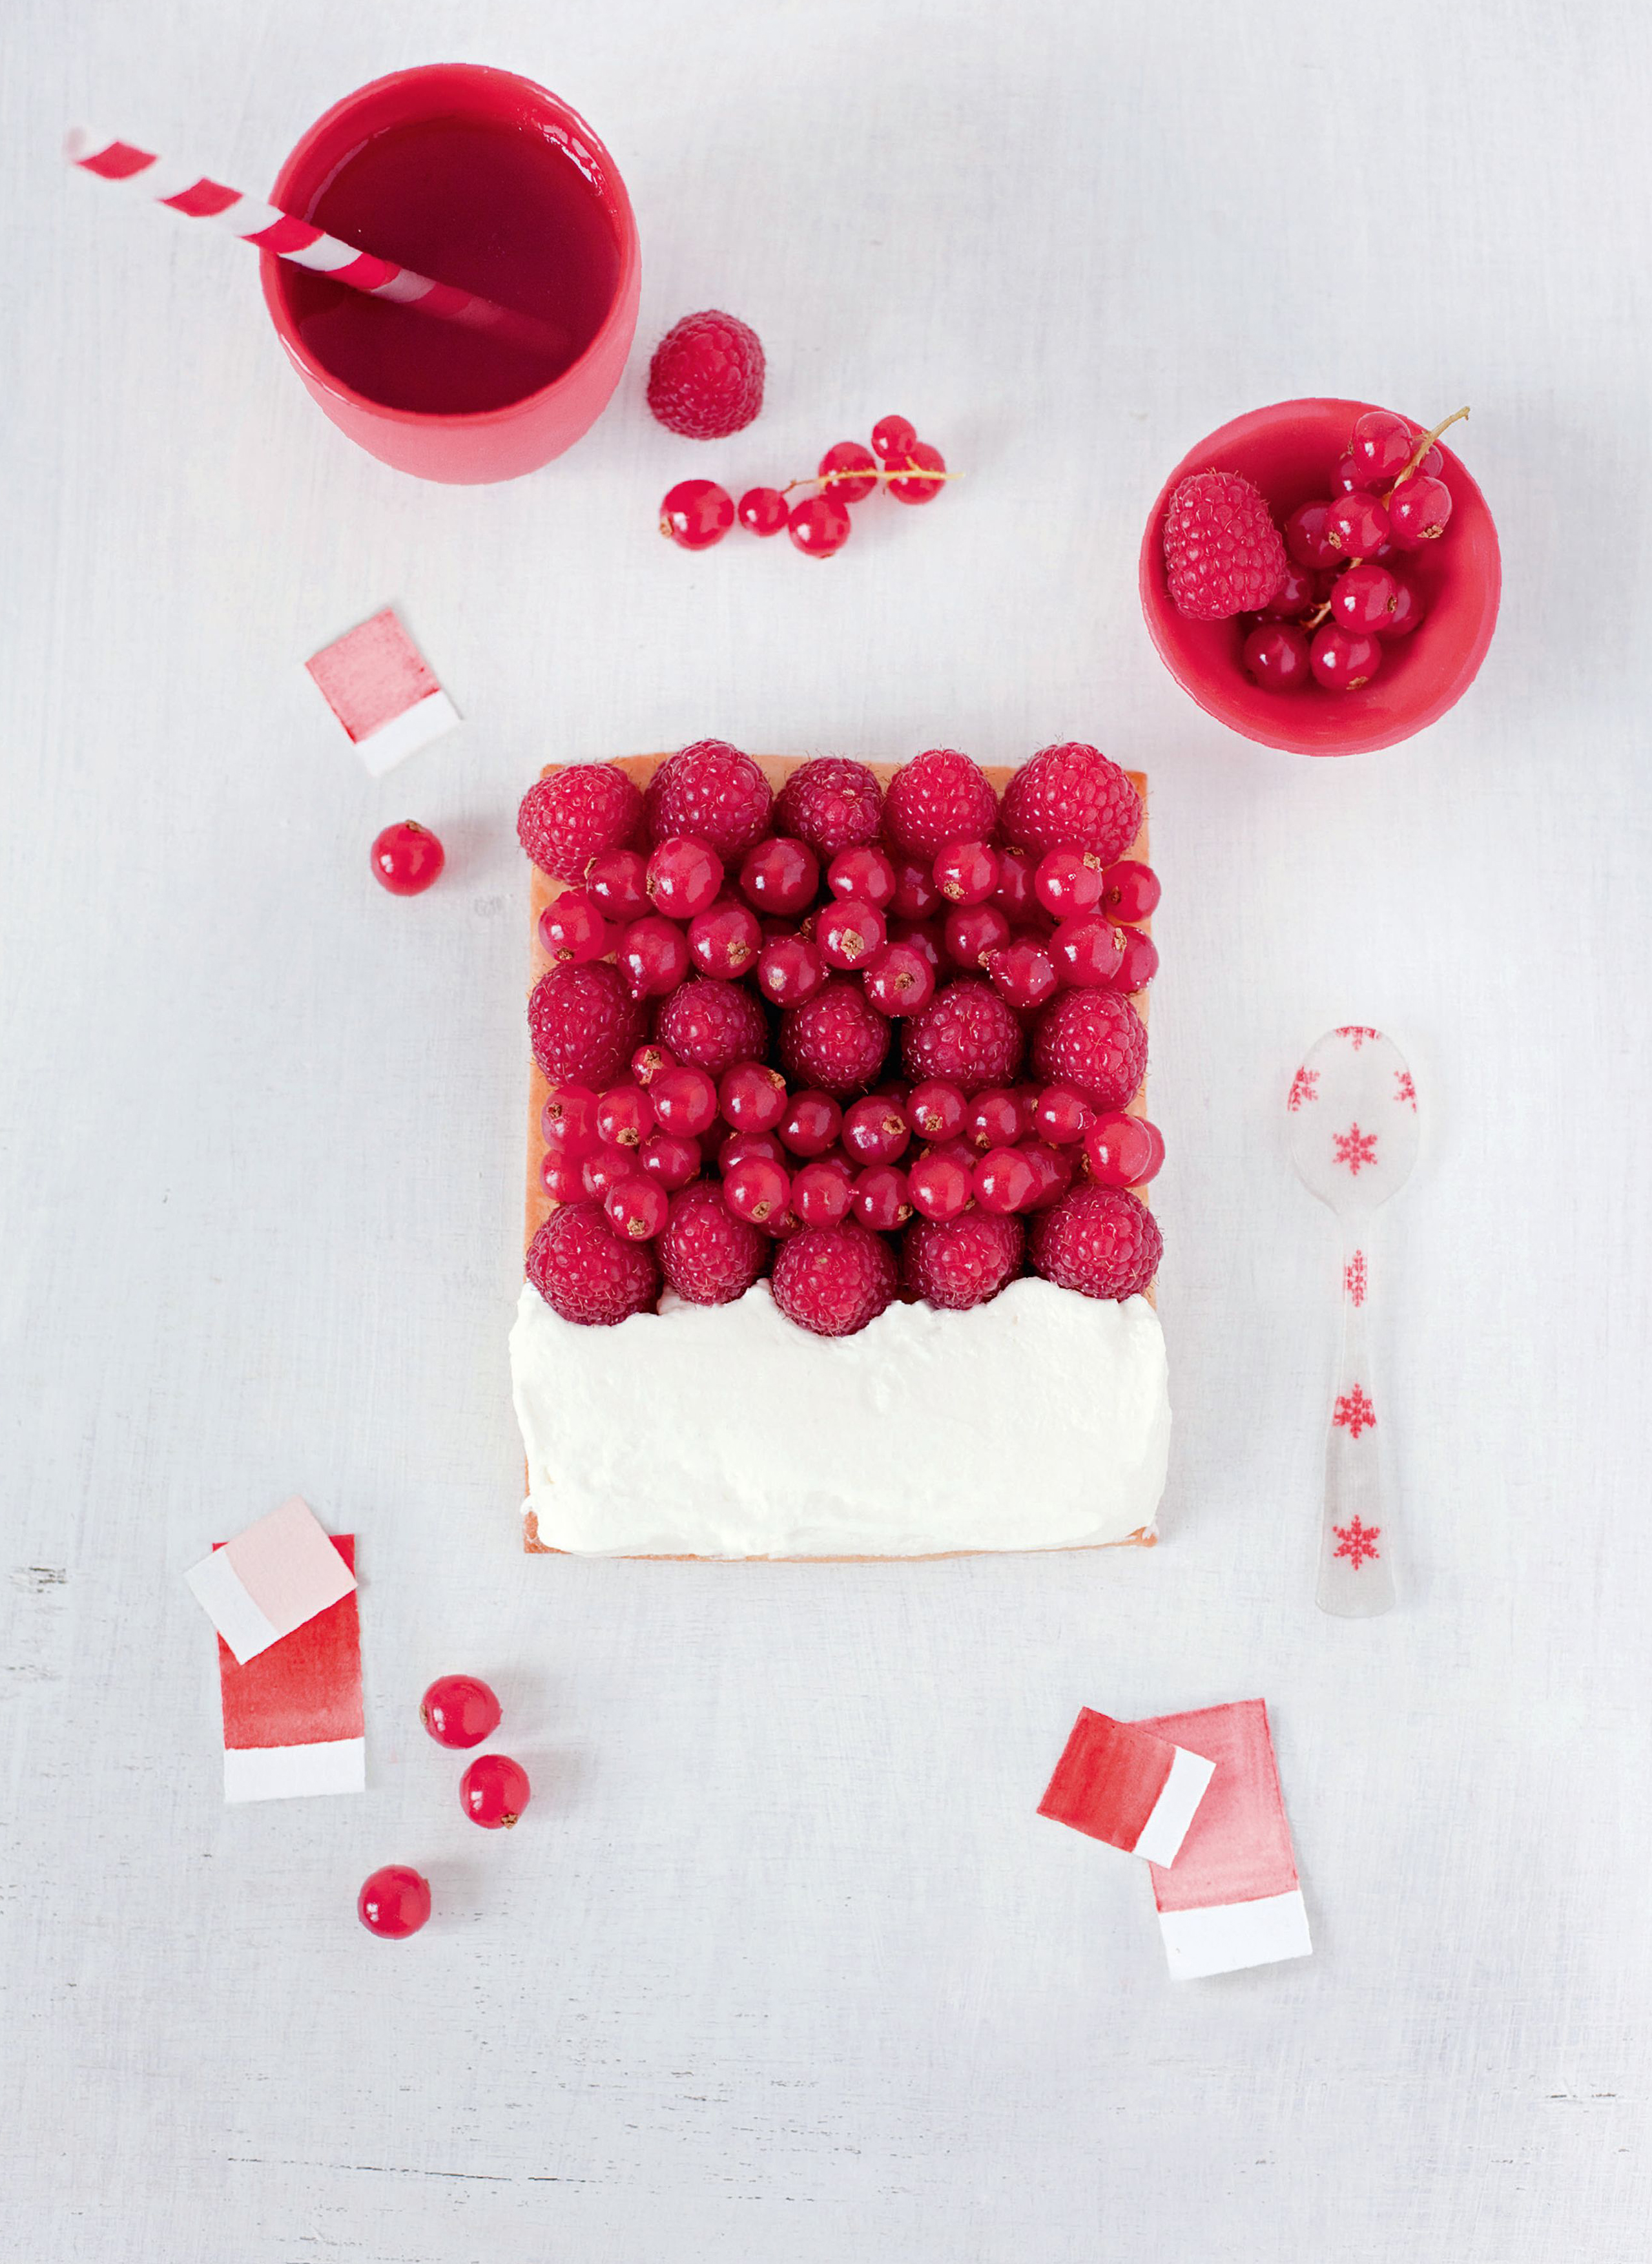 Red fruits – chantilly